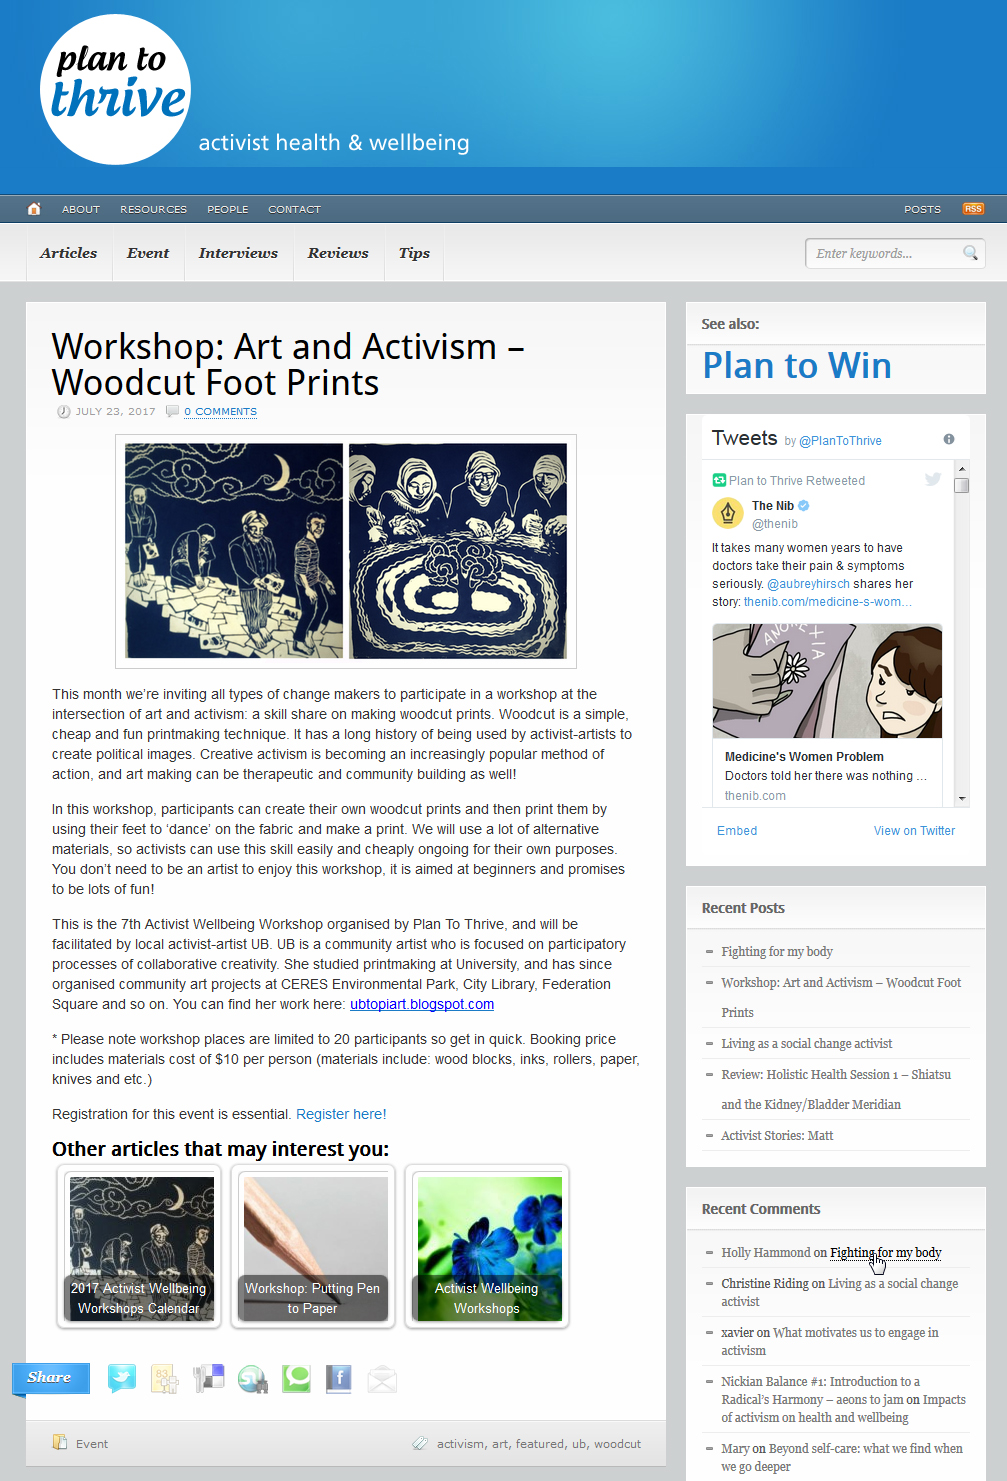 Plan To Thrive-Workshop: Art And Activism-Woodcut Foot Prints